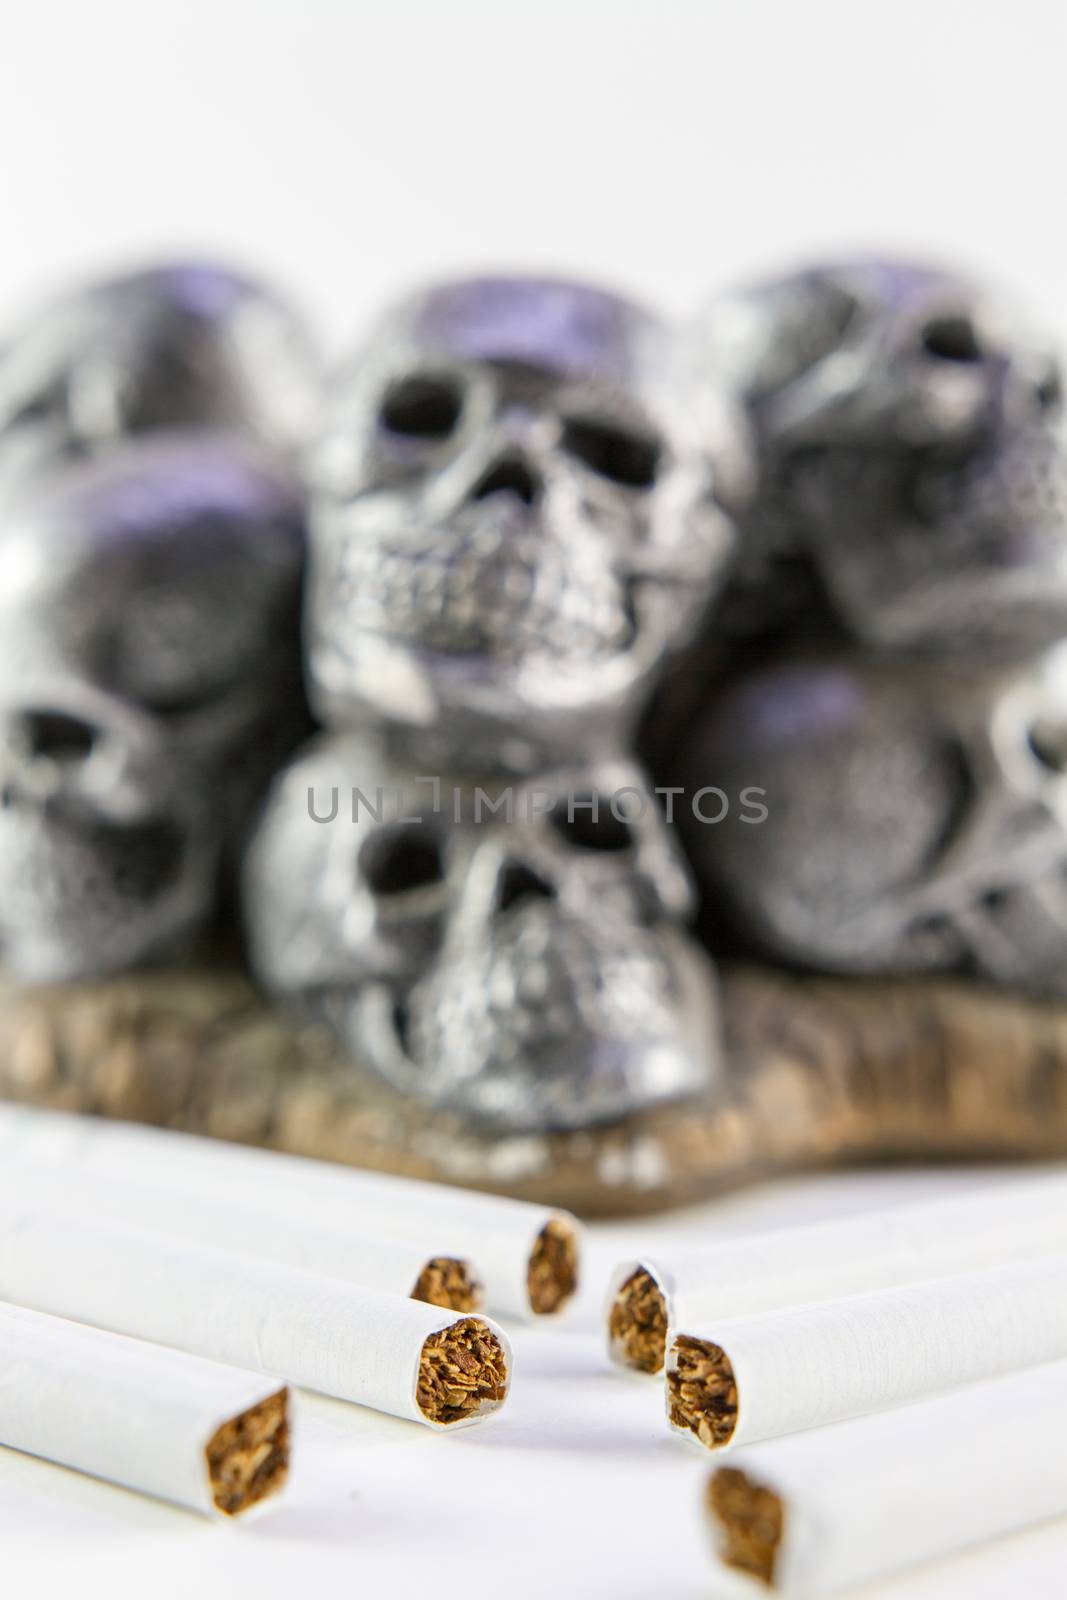 Anti smoking concept with cigarettes and skull